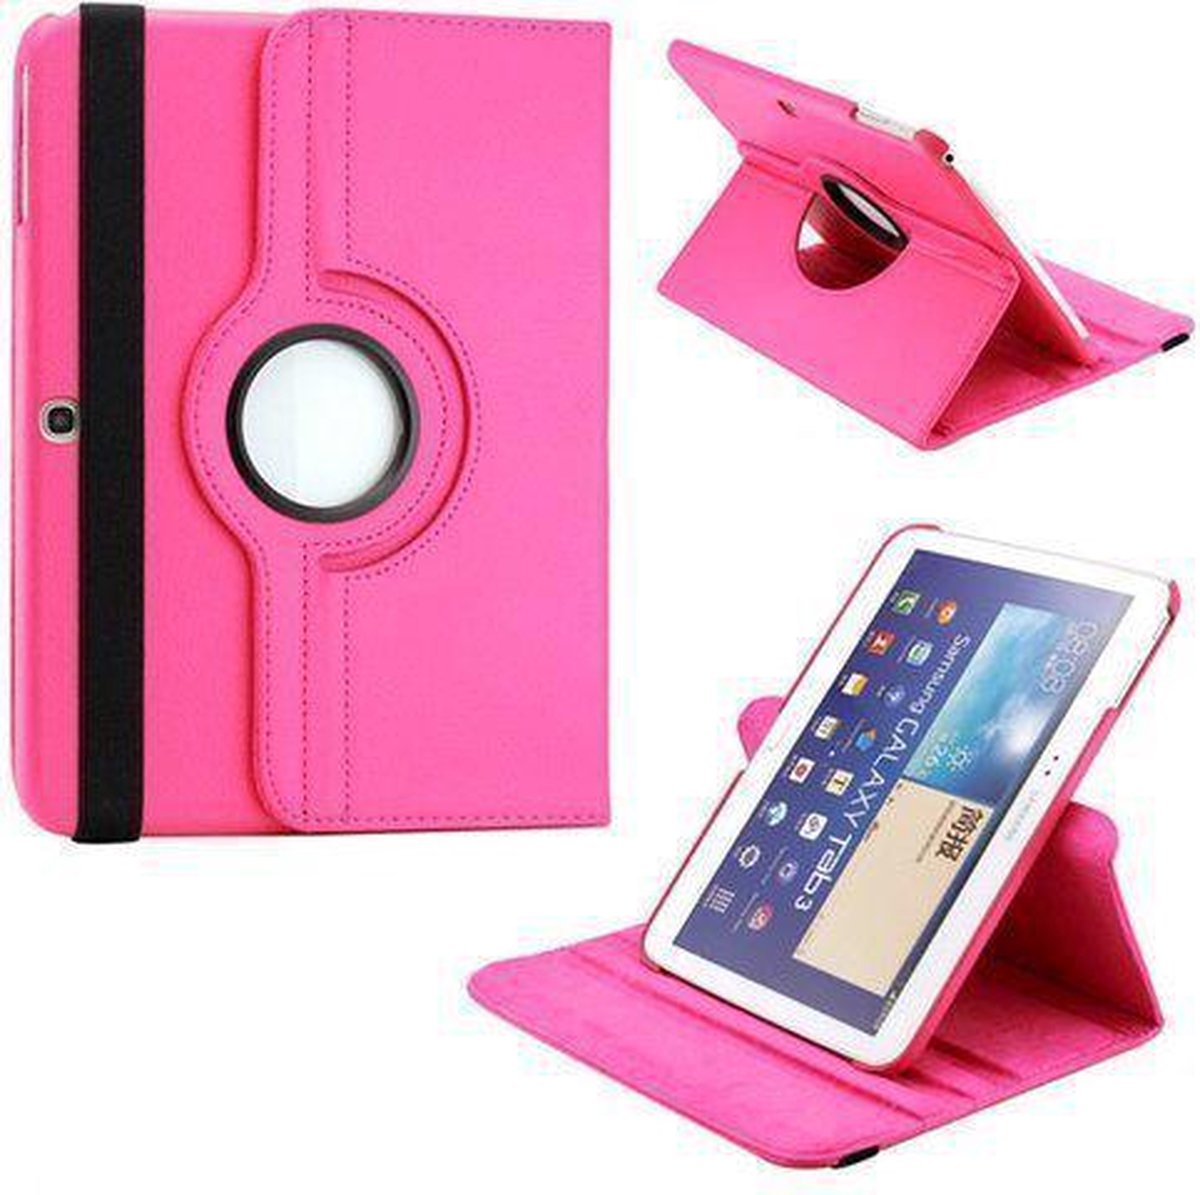 Samsung Galaxy tab 4 T530 T535 Leather 360 Degree Rotating Case Donker Roze Dark Pink